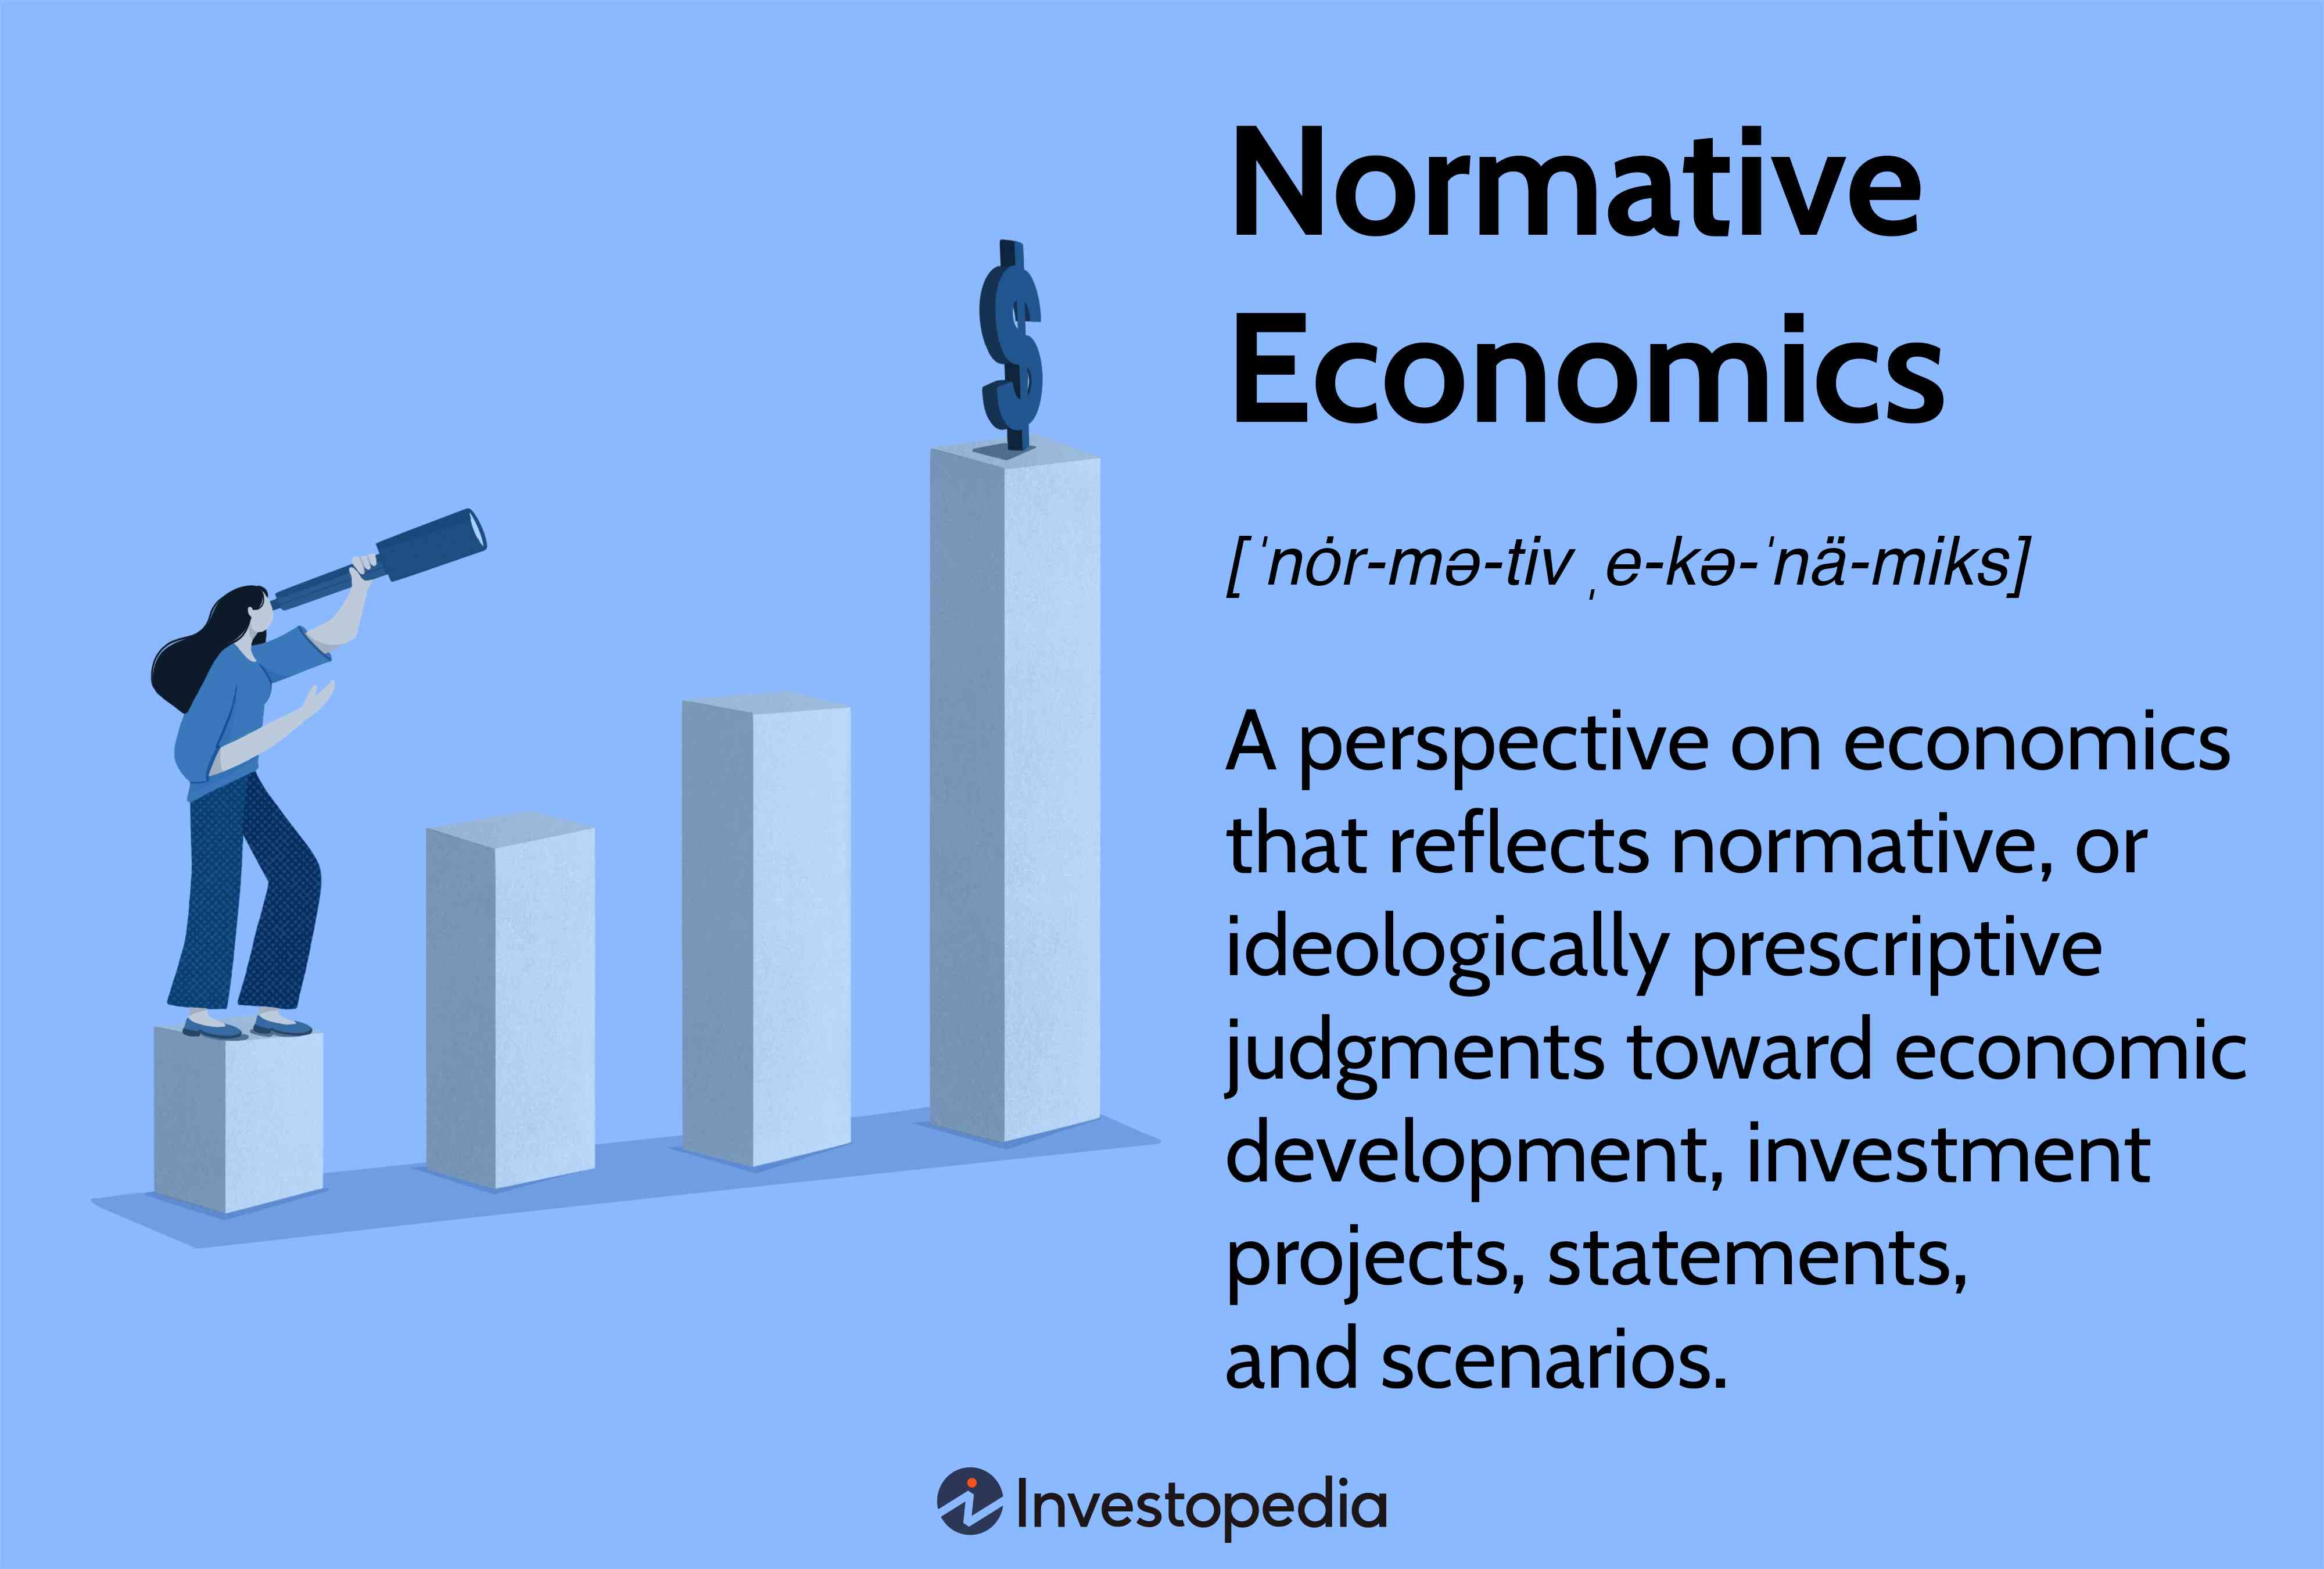 Normative Economics: A perspective on economics that reflects normative, or ideologically prescriptive judgments toward economic development, investment projects, statements, and scenarios.